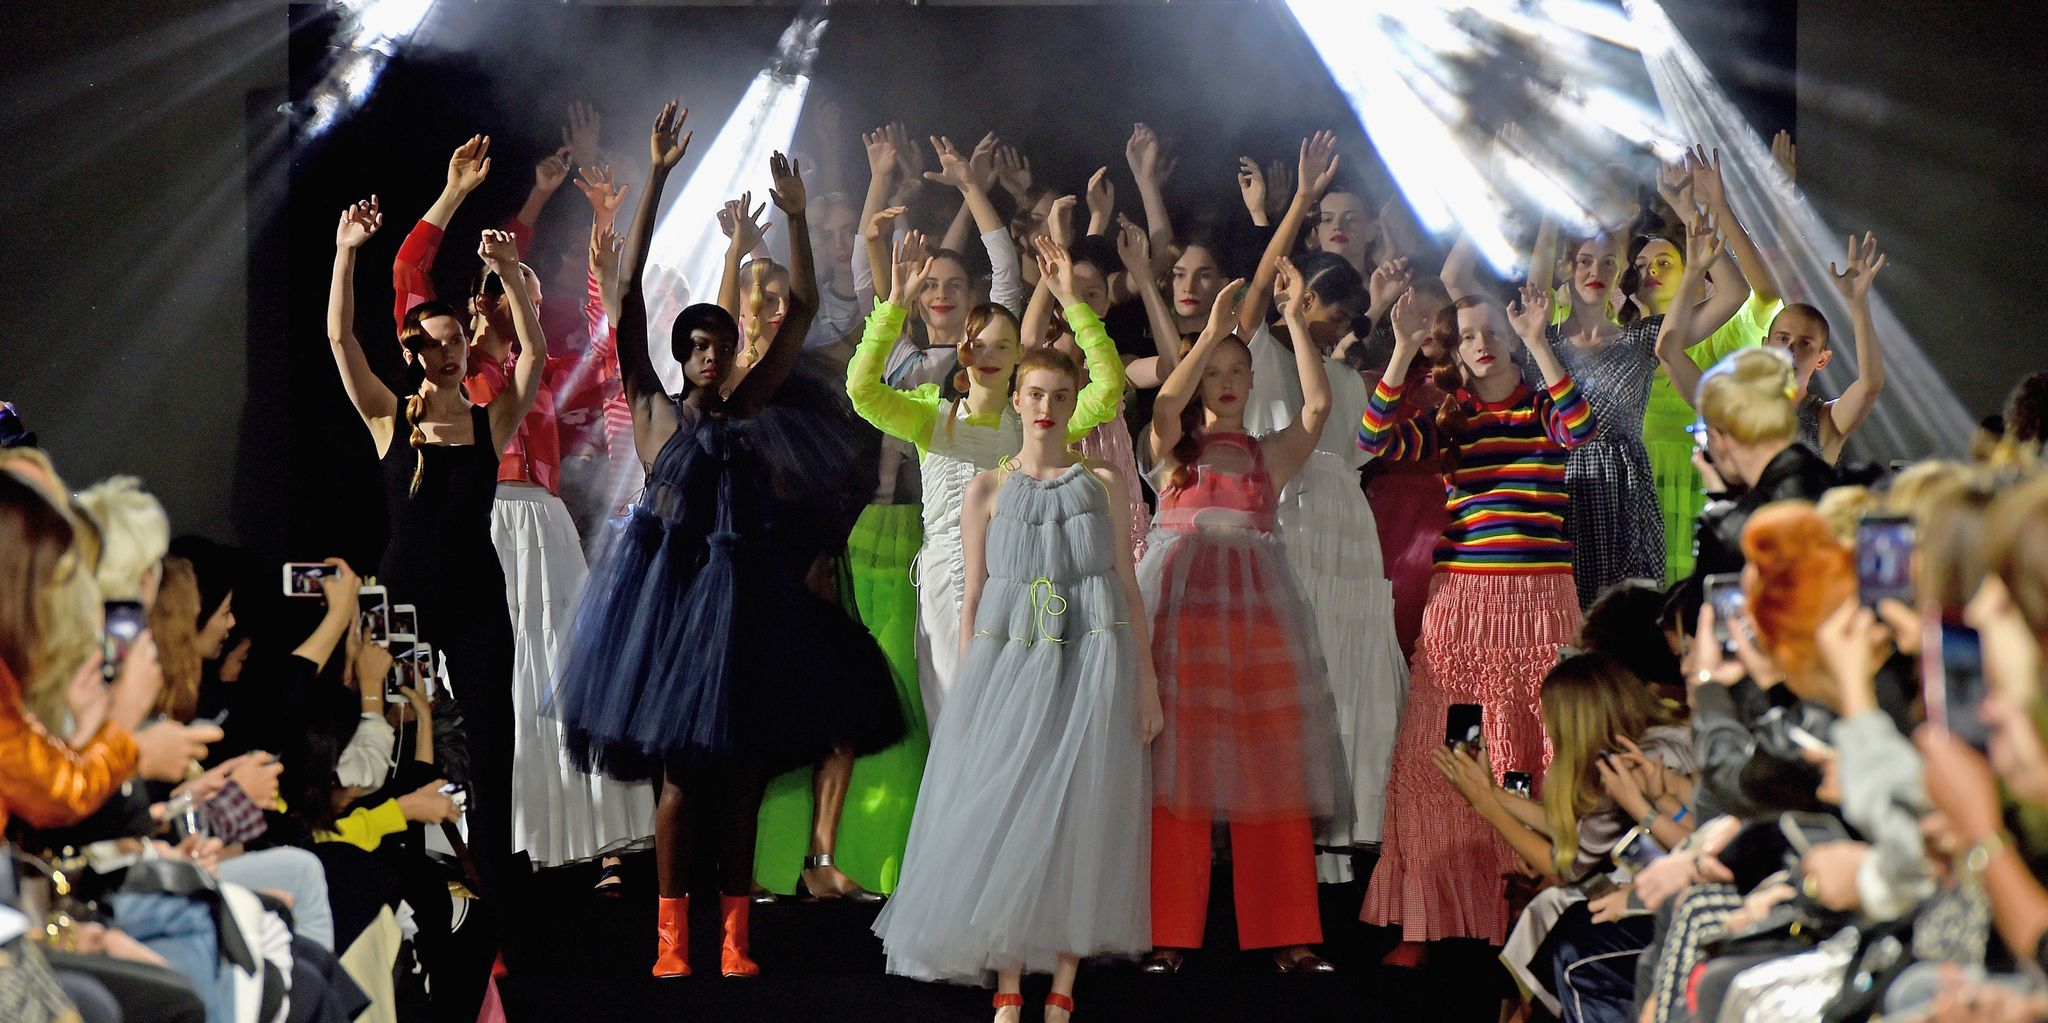 The 90s Rave Culture Returns At Fashion Week